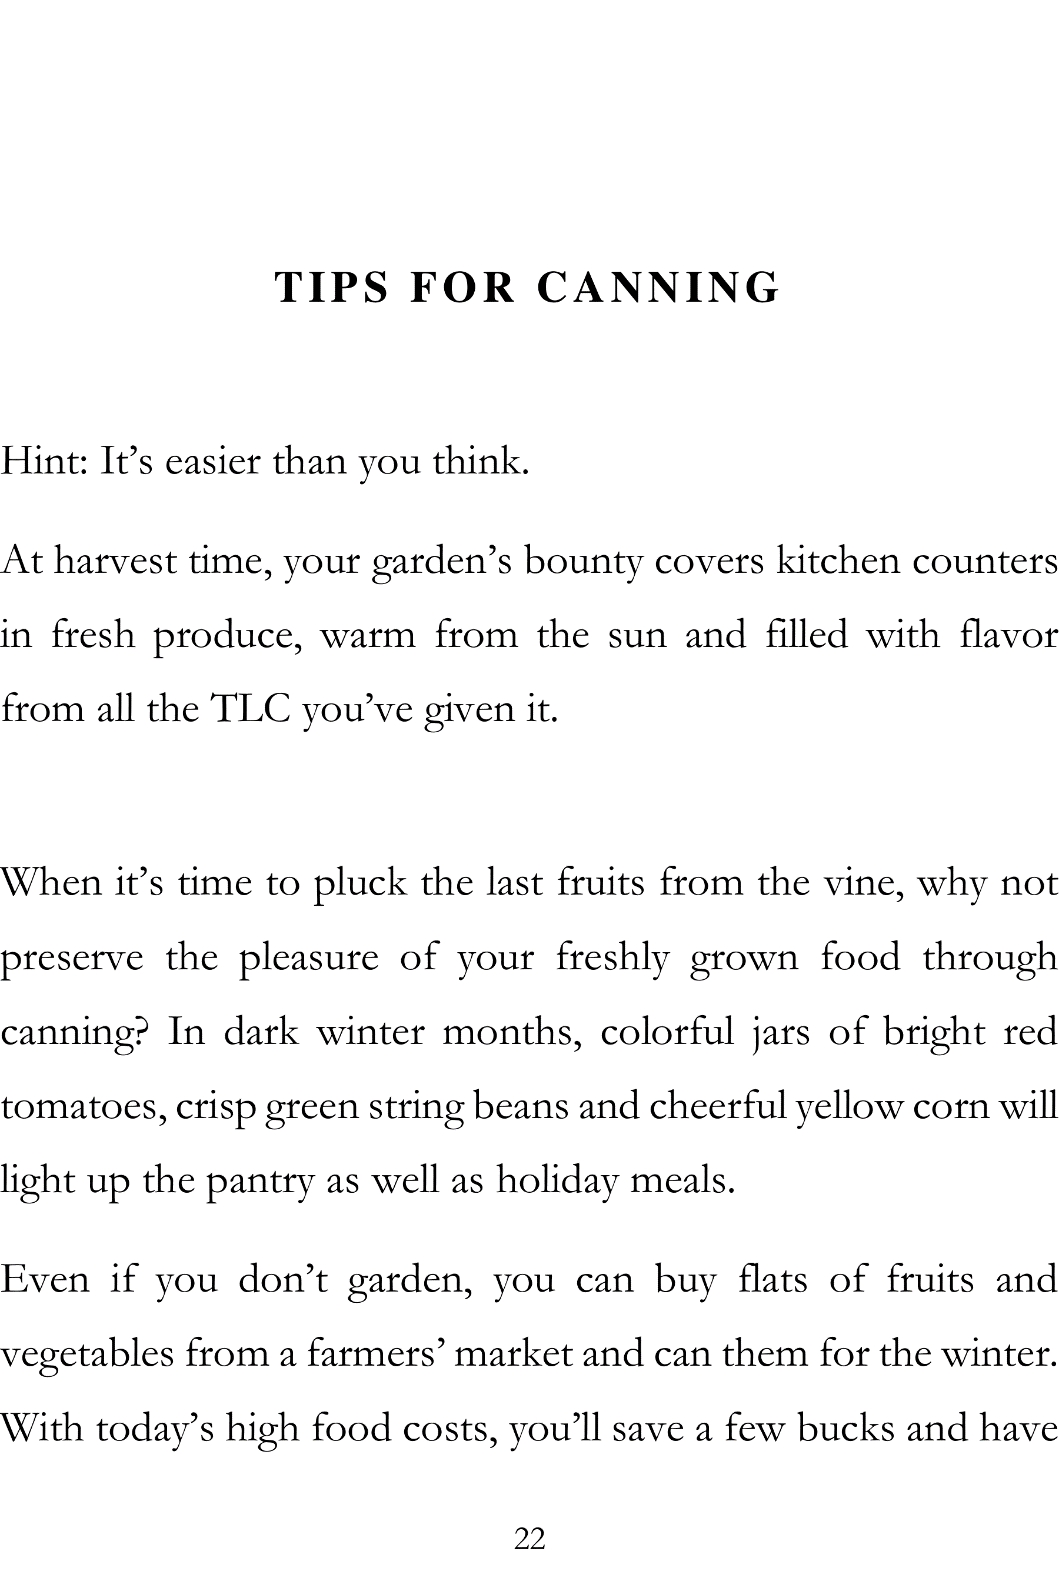 Canning Guide for Beginners Canning Tips and Recipes Canning at Home - photo 24